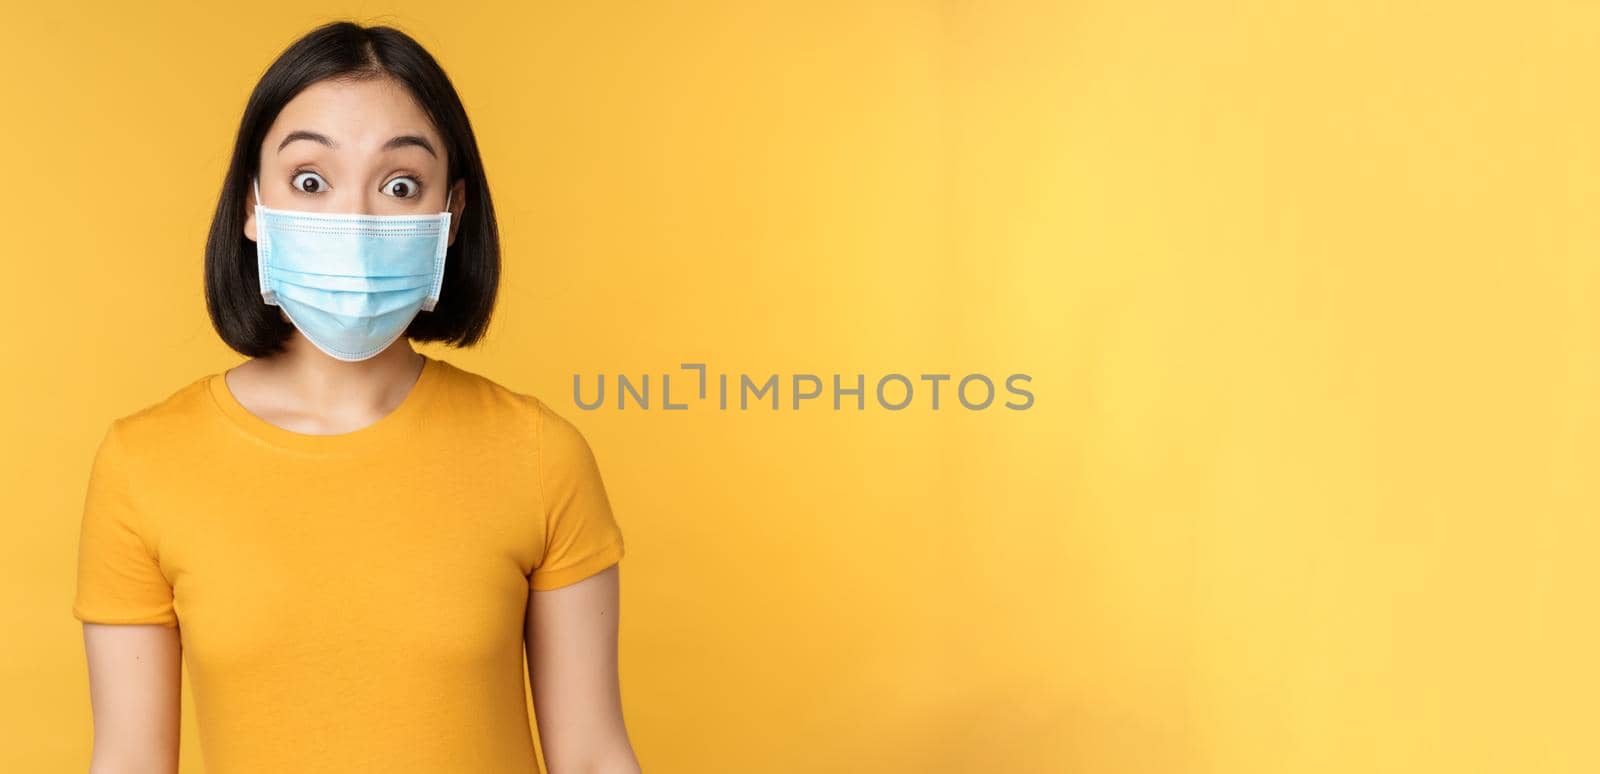 Portrait of korean girl in medical face mask looking surprised, amazed reaction to news, standing over yellow background.